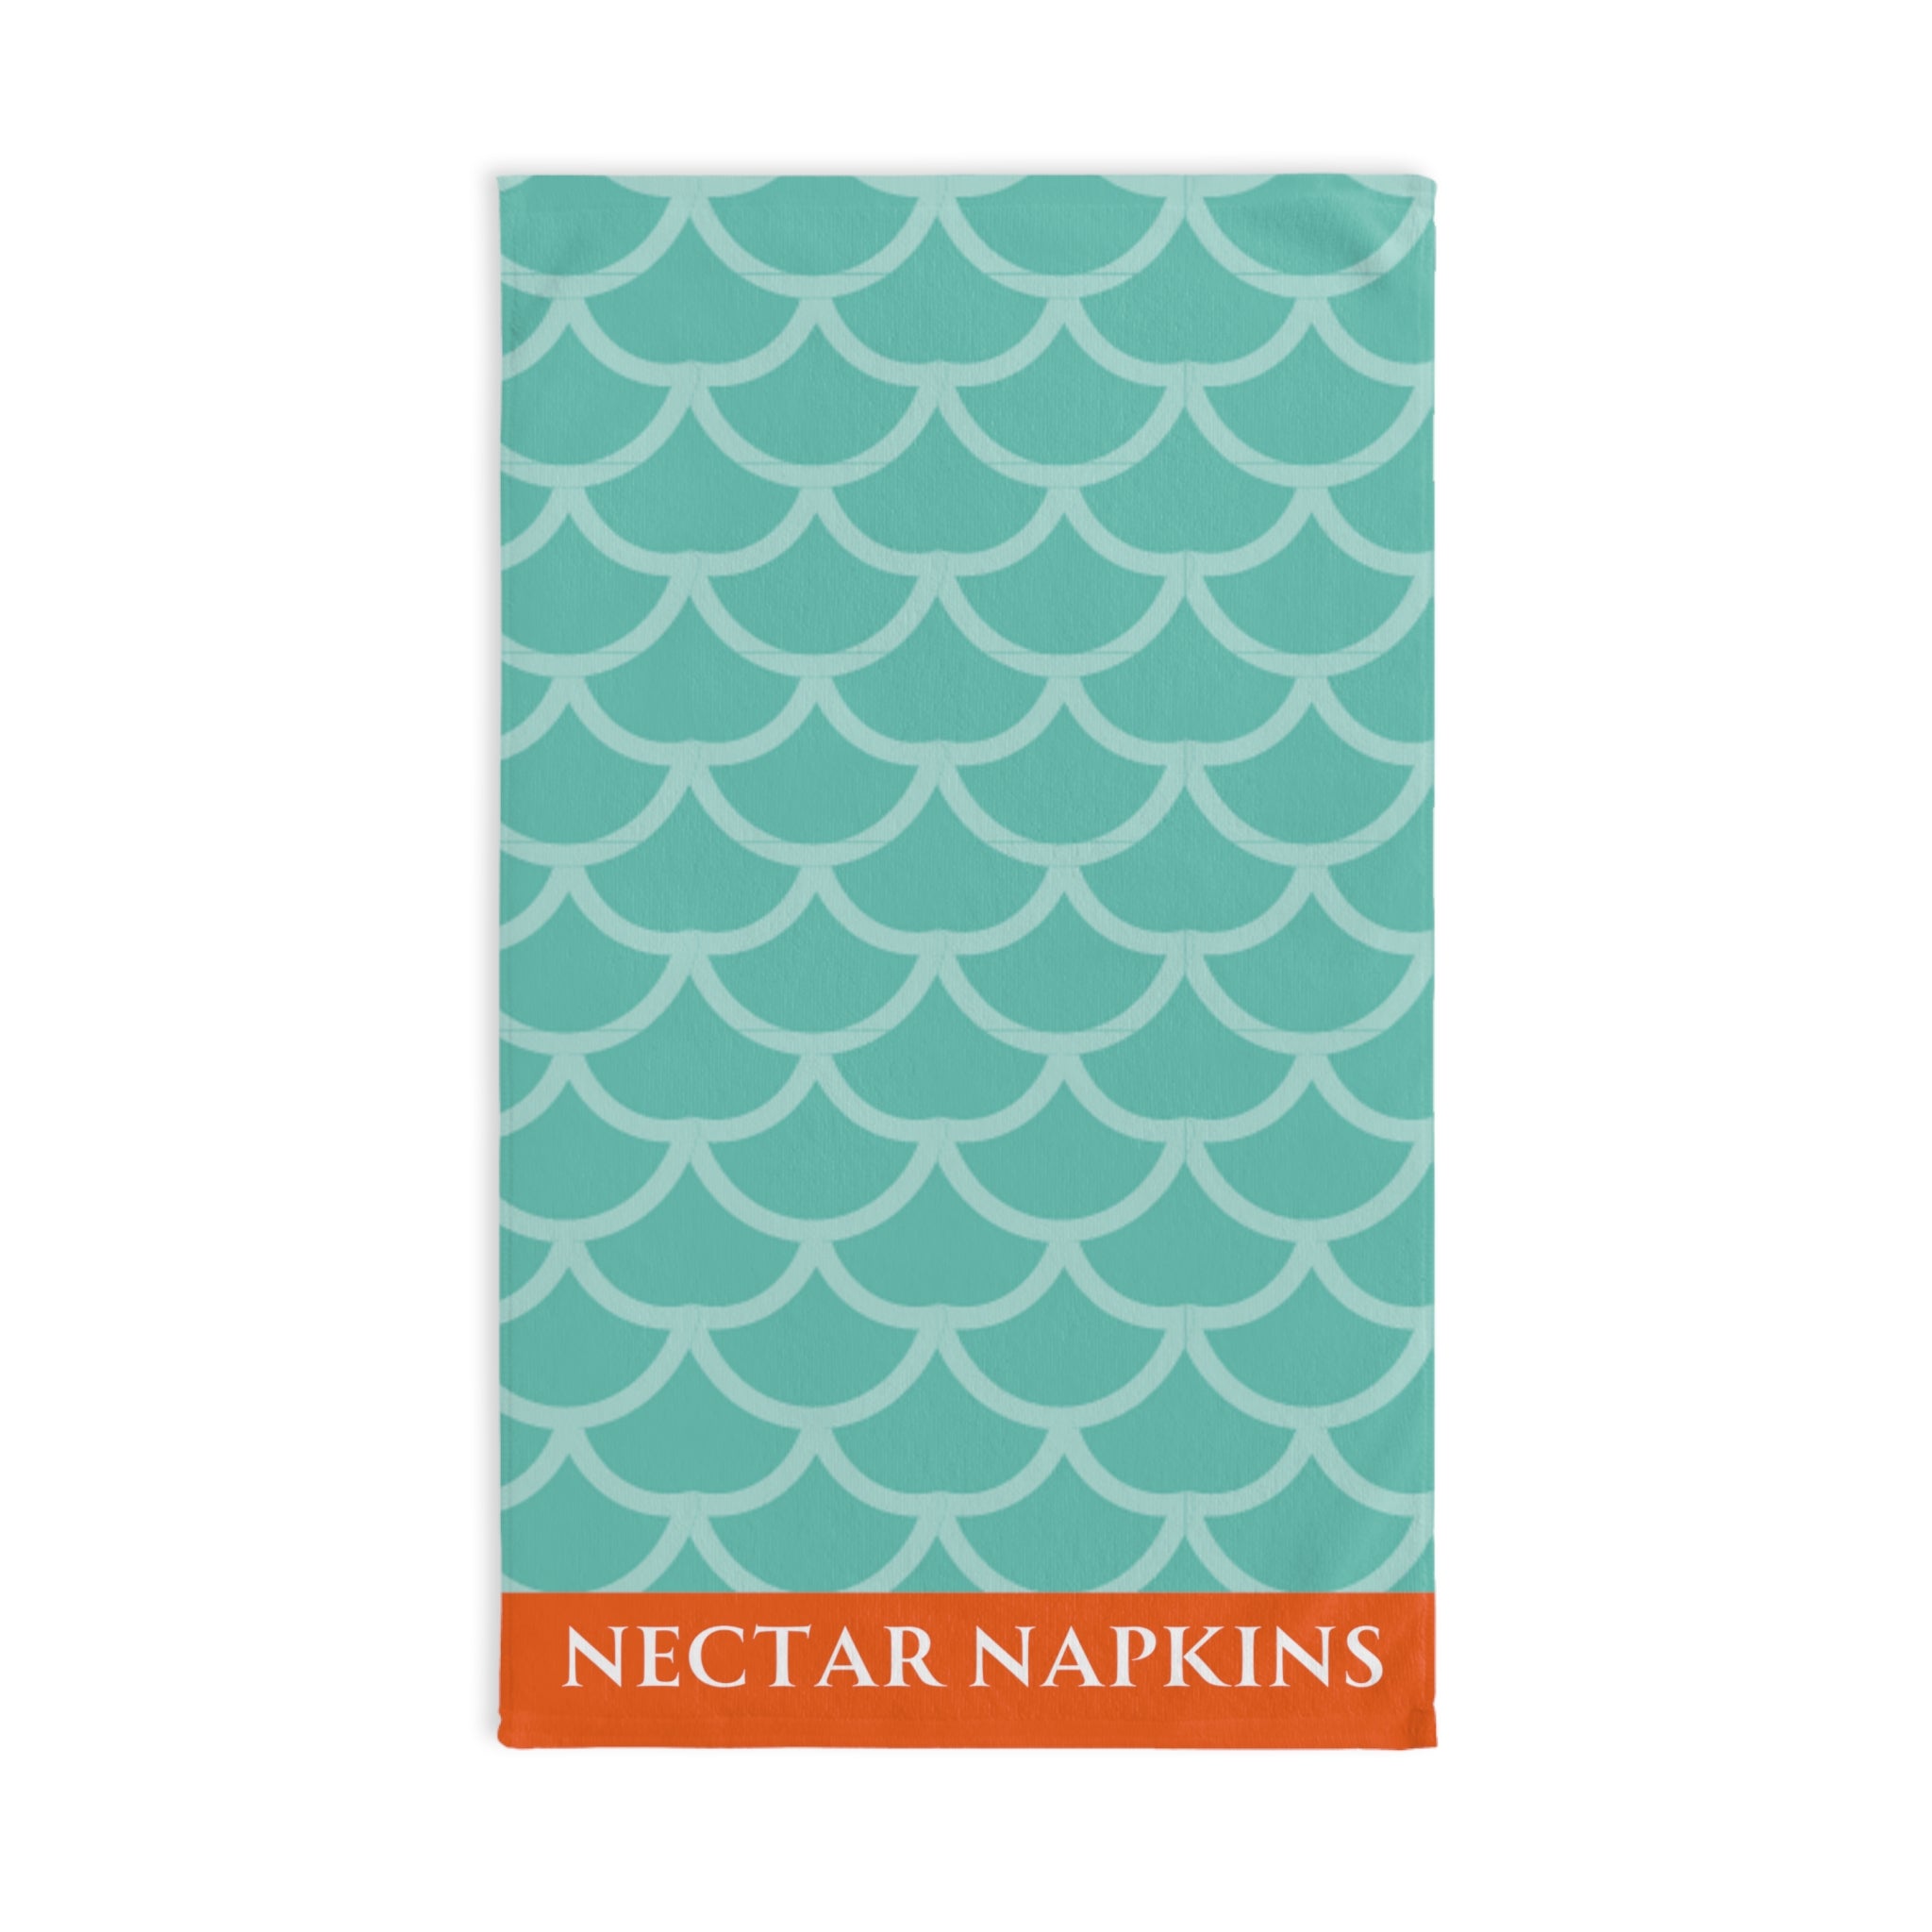 Mermaid Tail Mint Orange | Funny Gifts for Men - Gifts for Him - Birthday Gifts for Men, Him, Husband, Boyfriend, New Couple Gifts, Fathers & Valentines Day Gifts, Hand Towels NECTAR NAPKINS